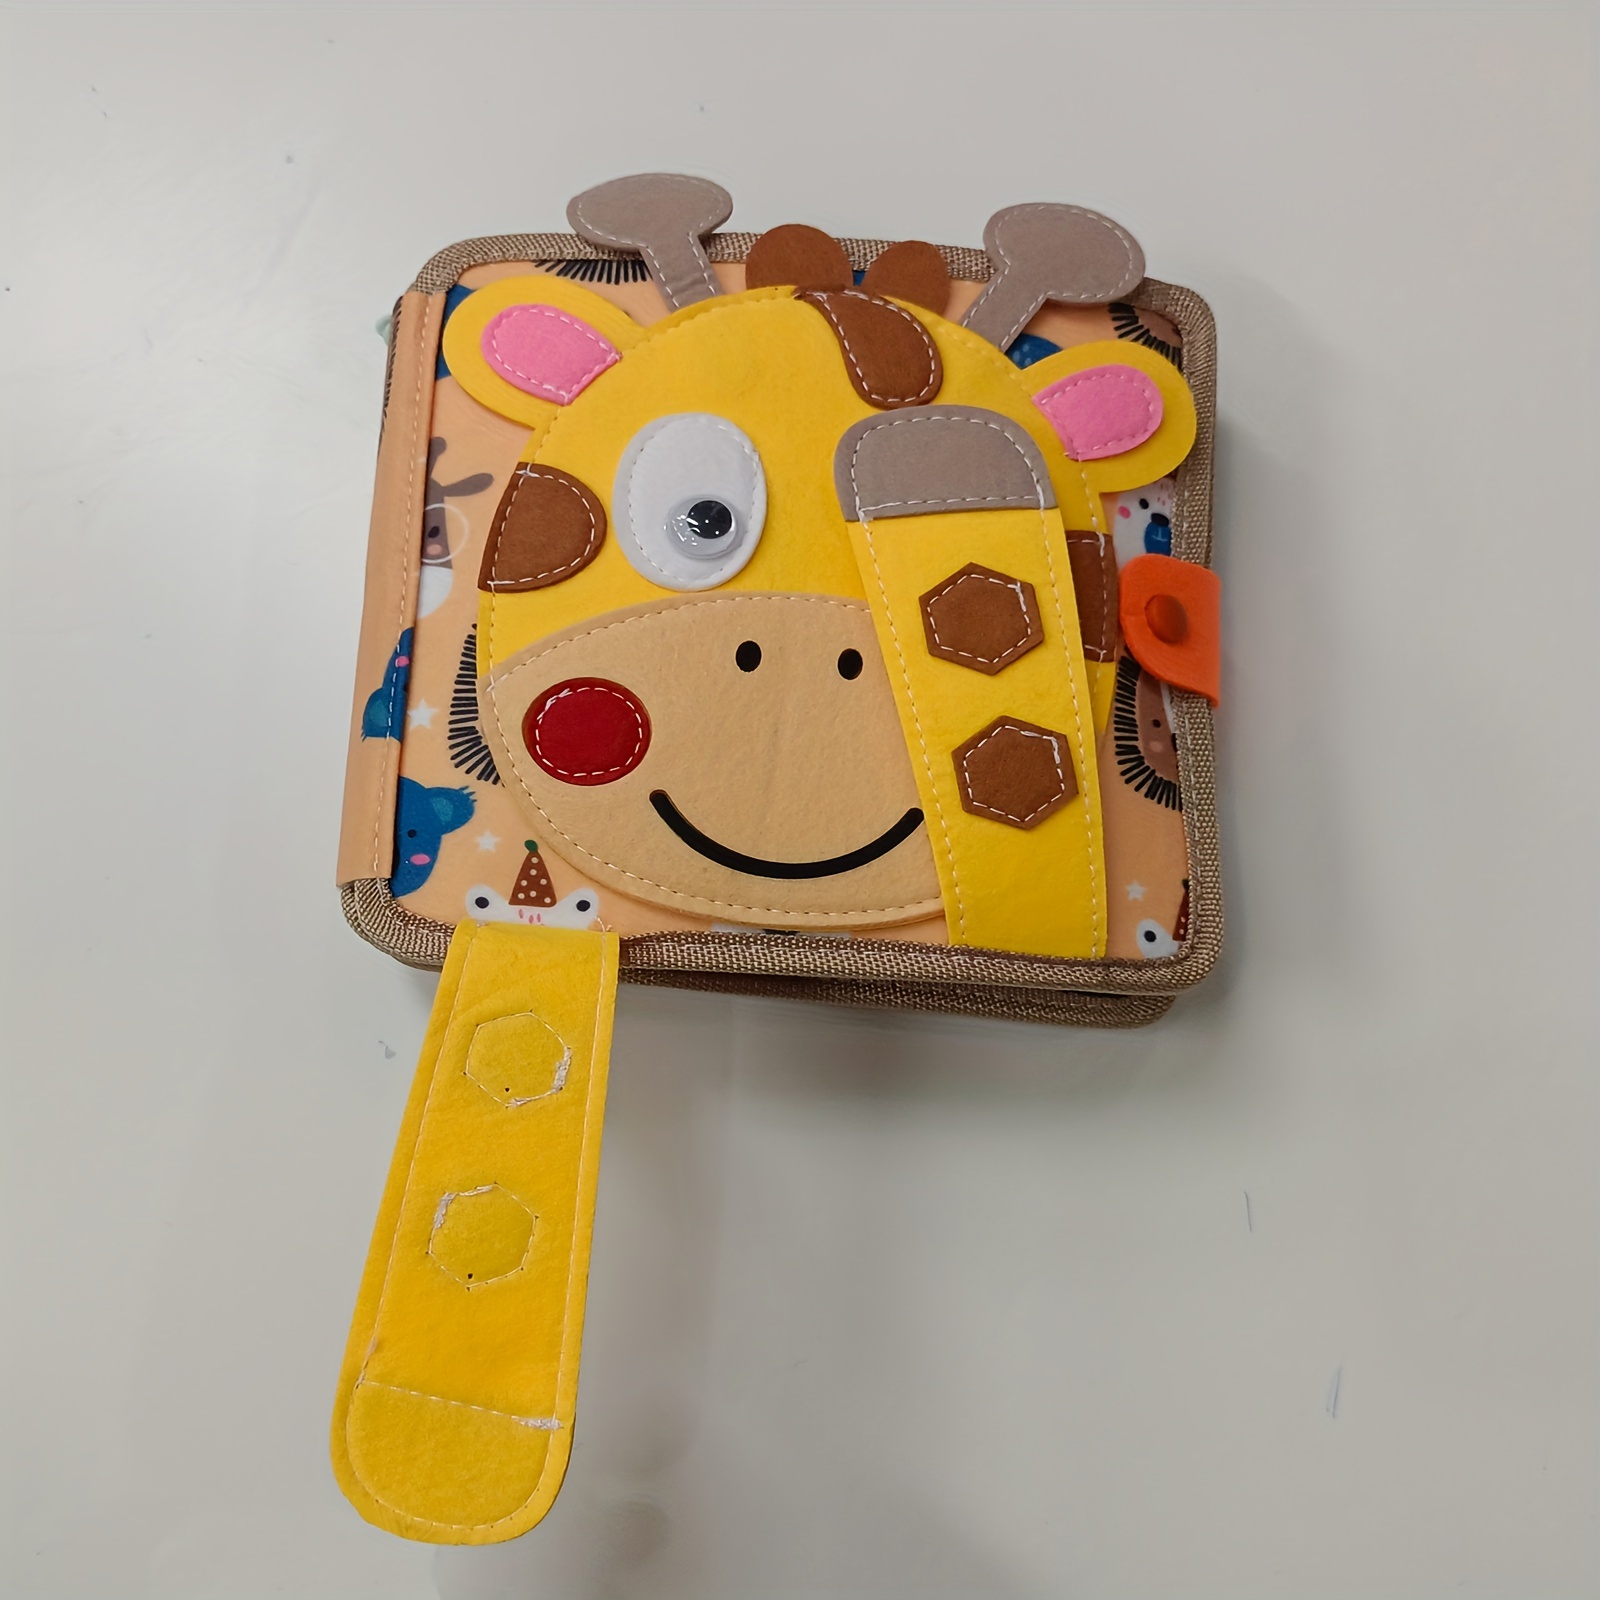 Toddler Busy Board: Peek-a-Boo Edition - Busy Toddler